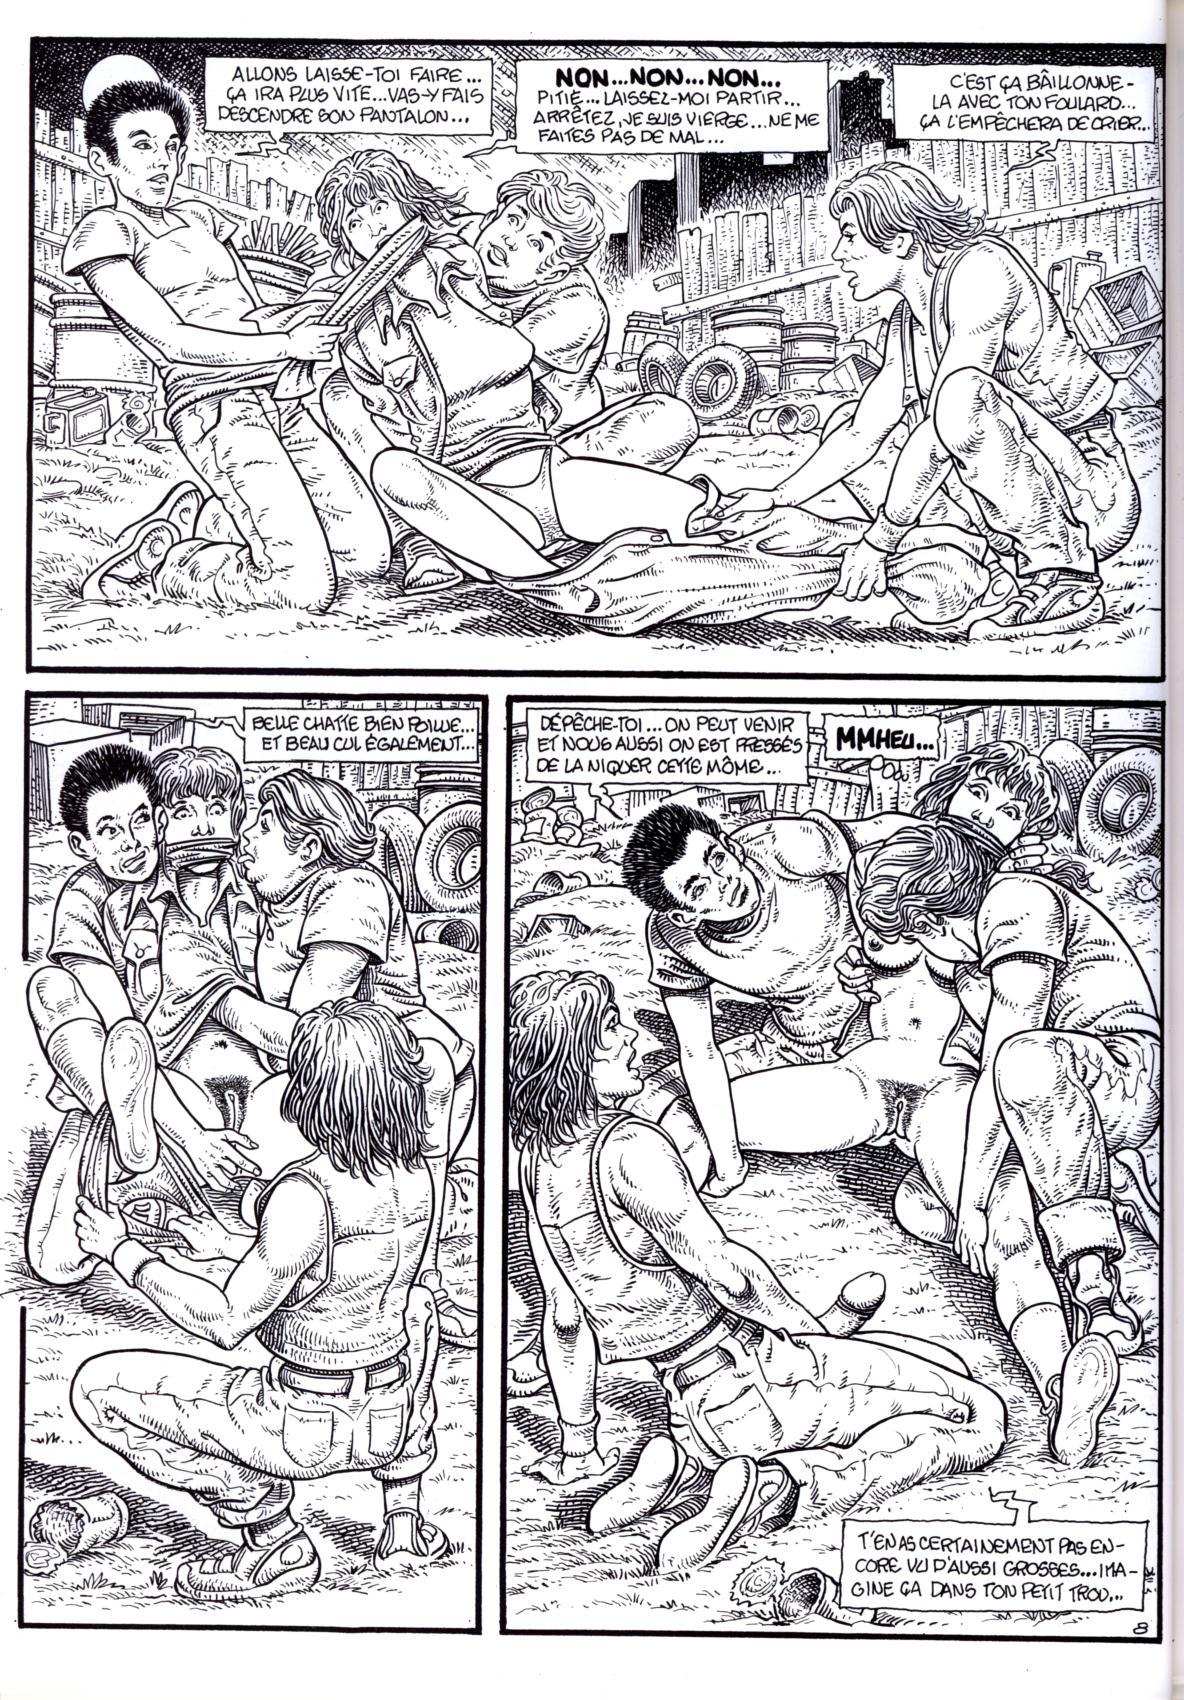 The Mary Magdalene Boarding School - Volume 3 numero d'image 10